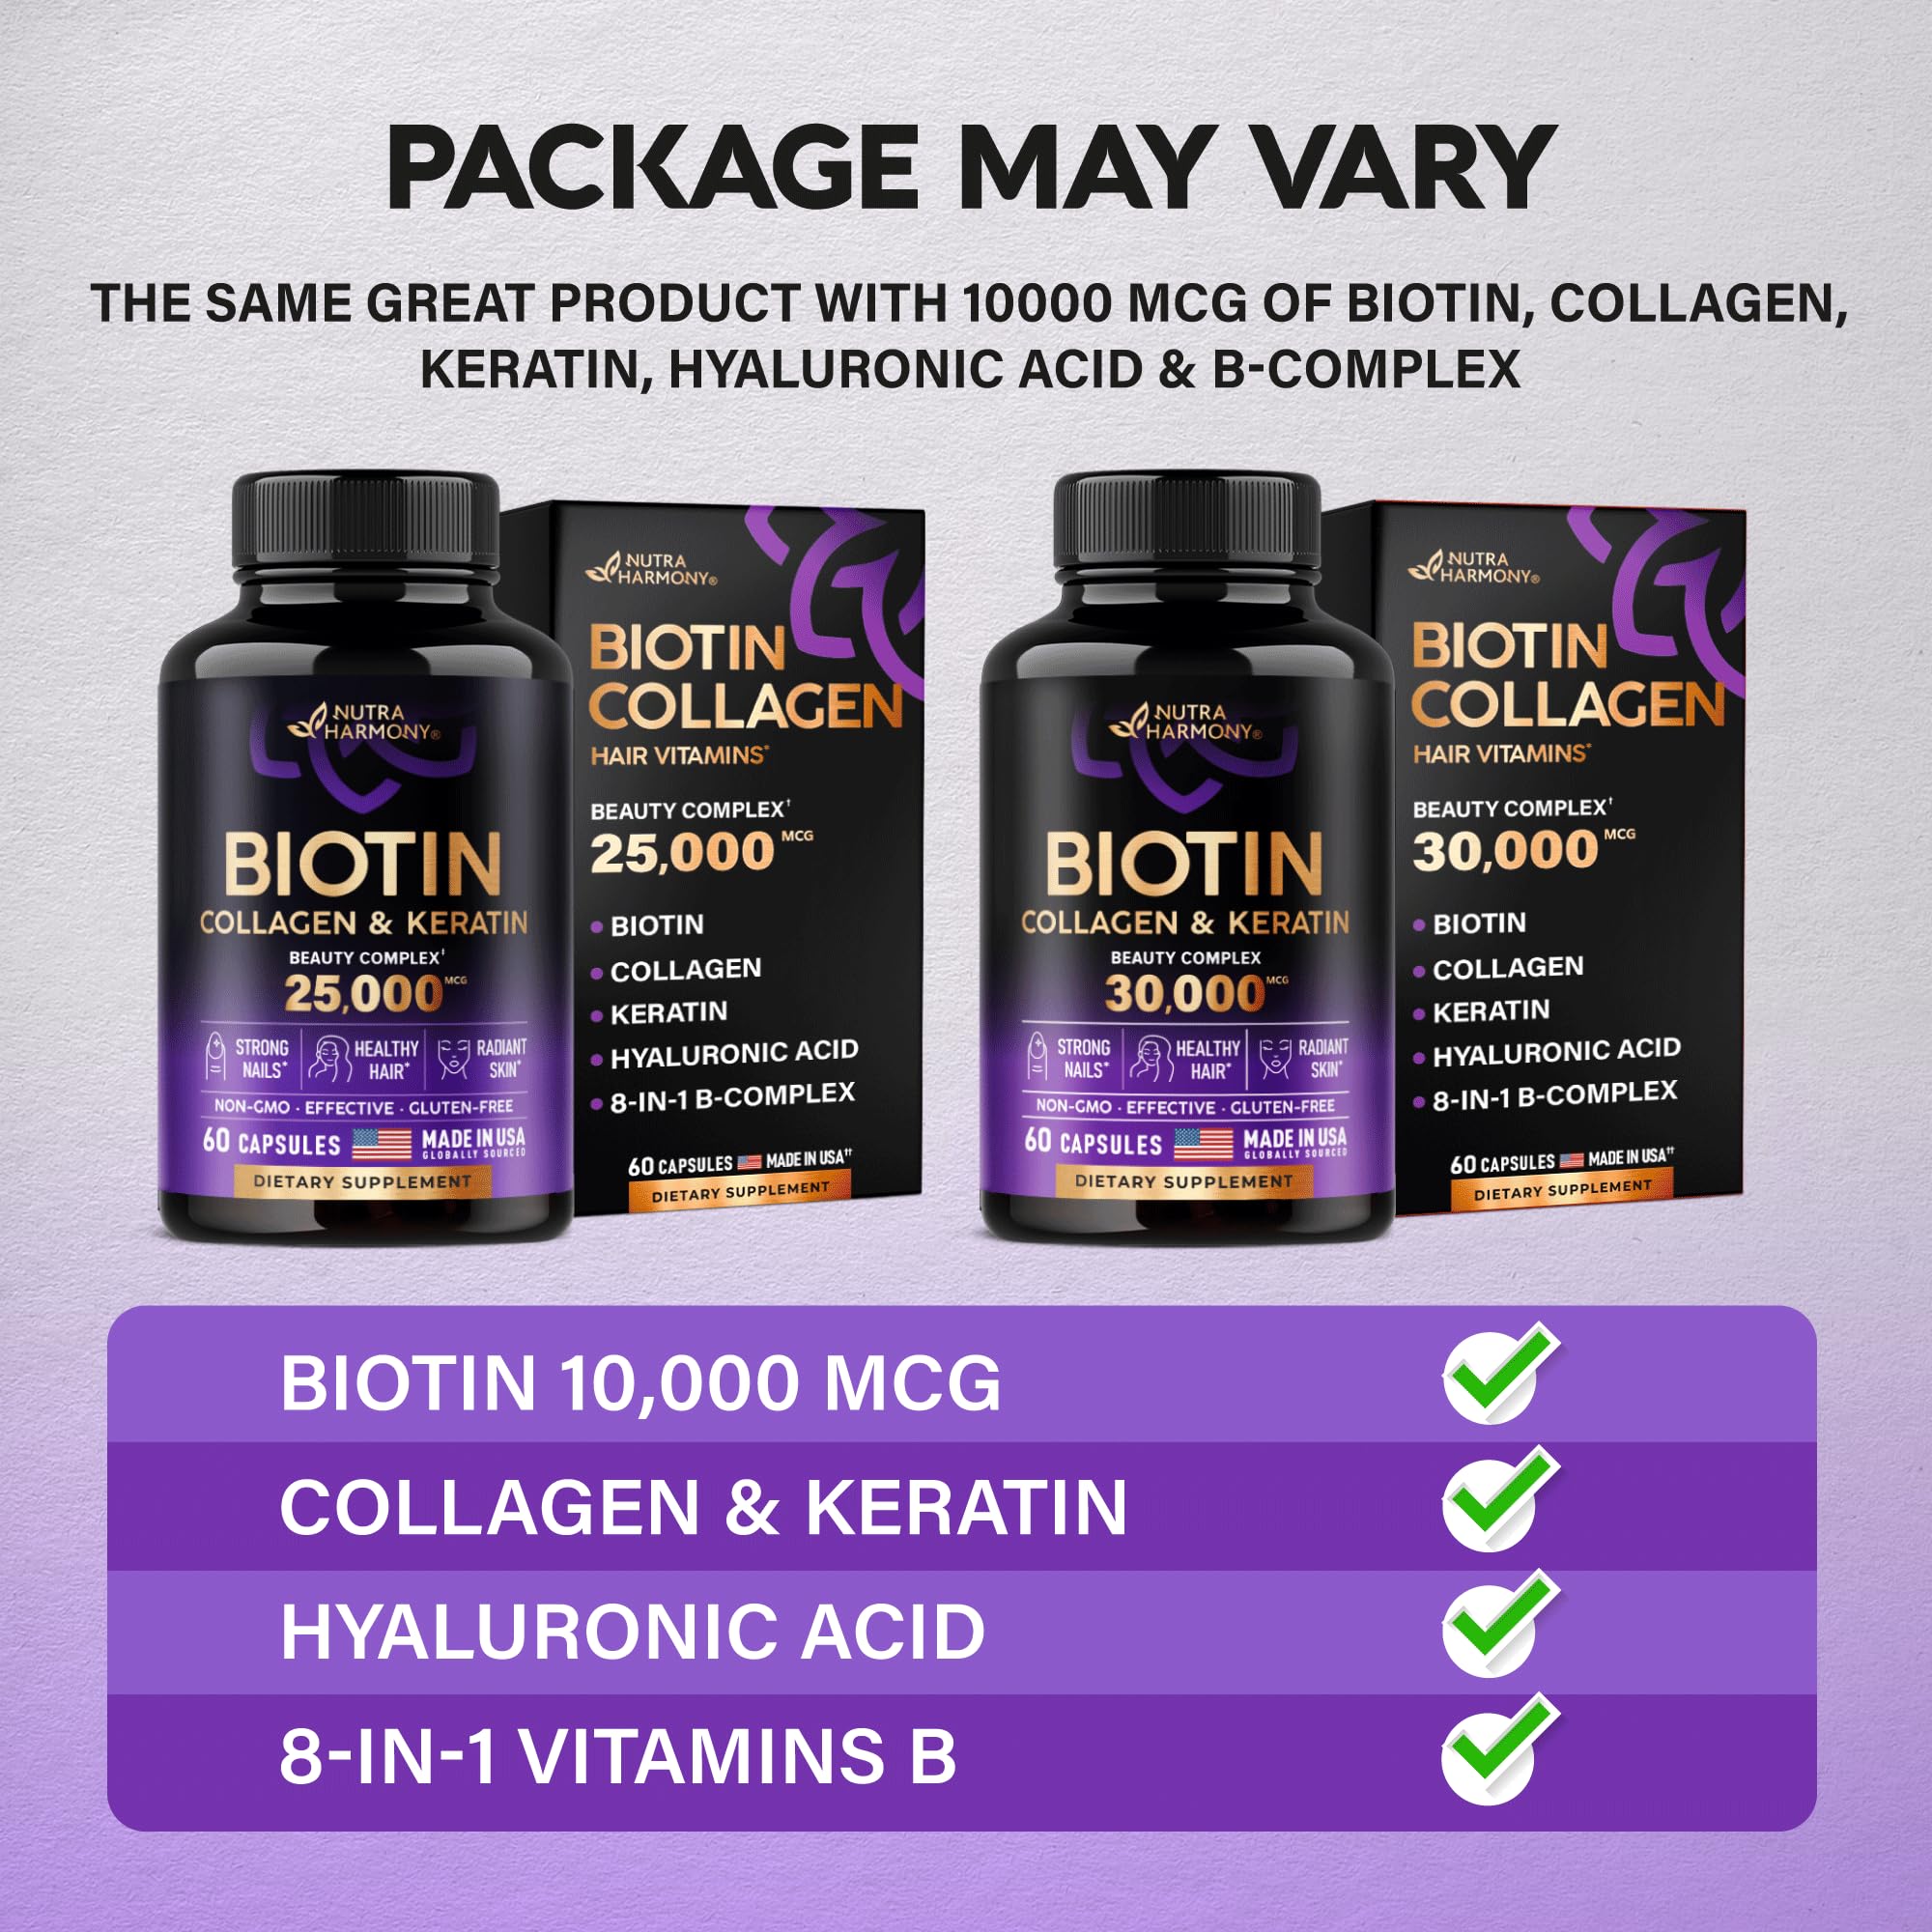 Biotin | Collagen | Keratin | Hyaluronic Acid - Hair Growth Support Supplement | Skin & Nails Beauty Complex 25000 mcg - B1 | B2 | B3 | B6 | B7 - Made in USA - For Women & Men | 60 Capsules